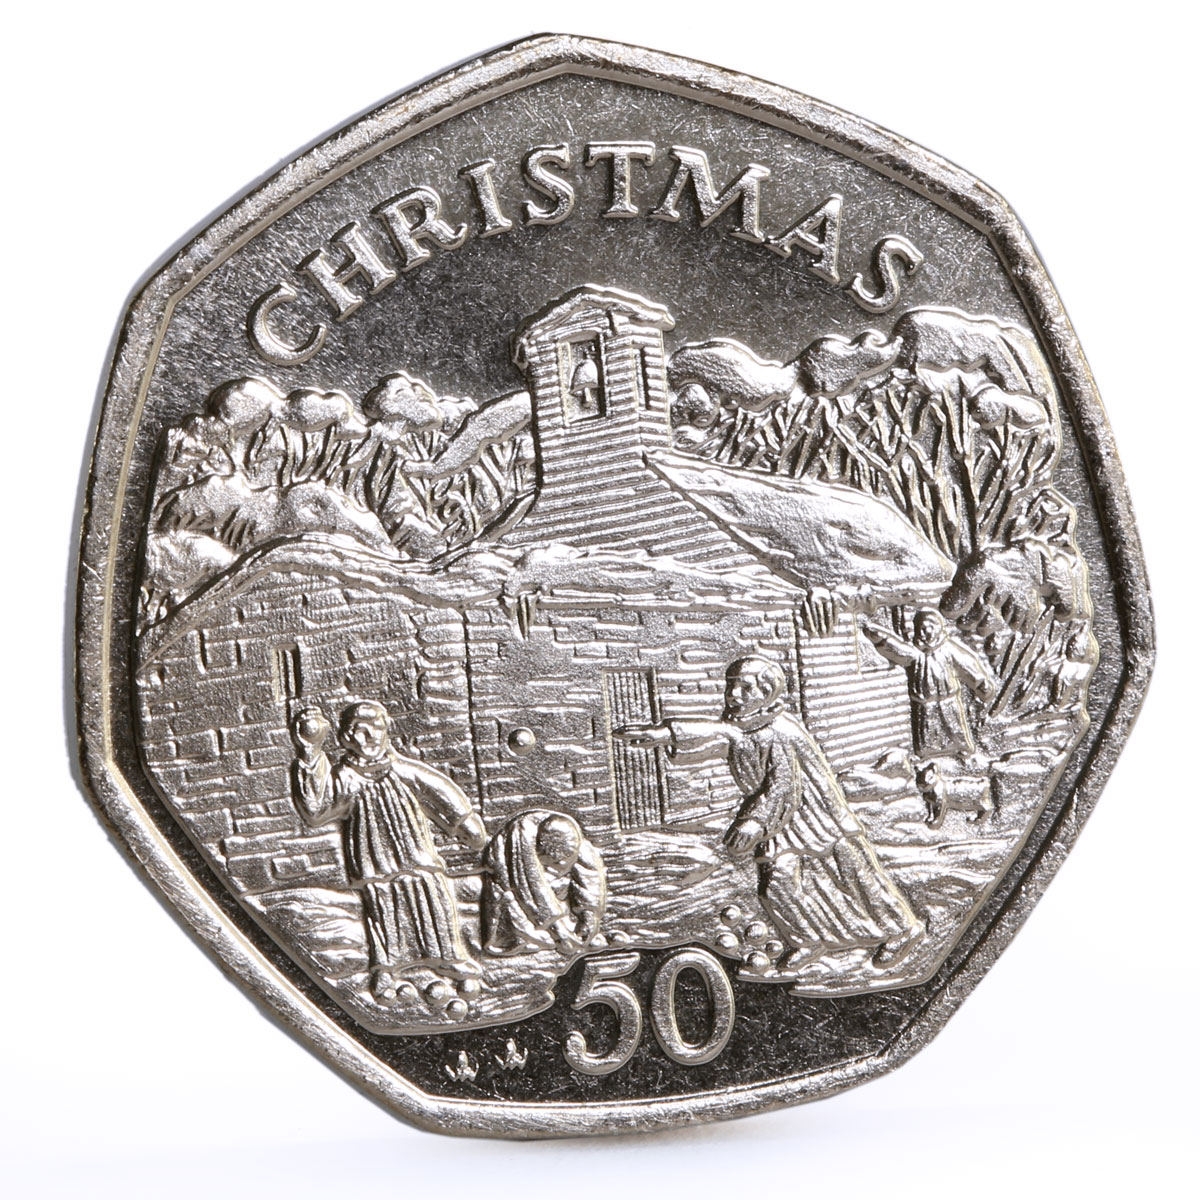 Isle of Man 50 pence Holidays Saints Christmas Snowball Fight CuNi coin 1996